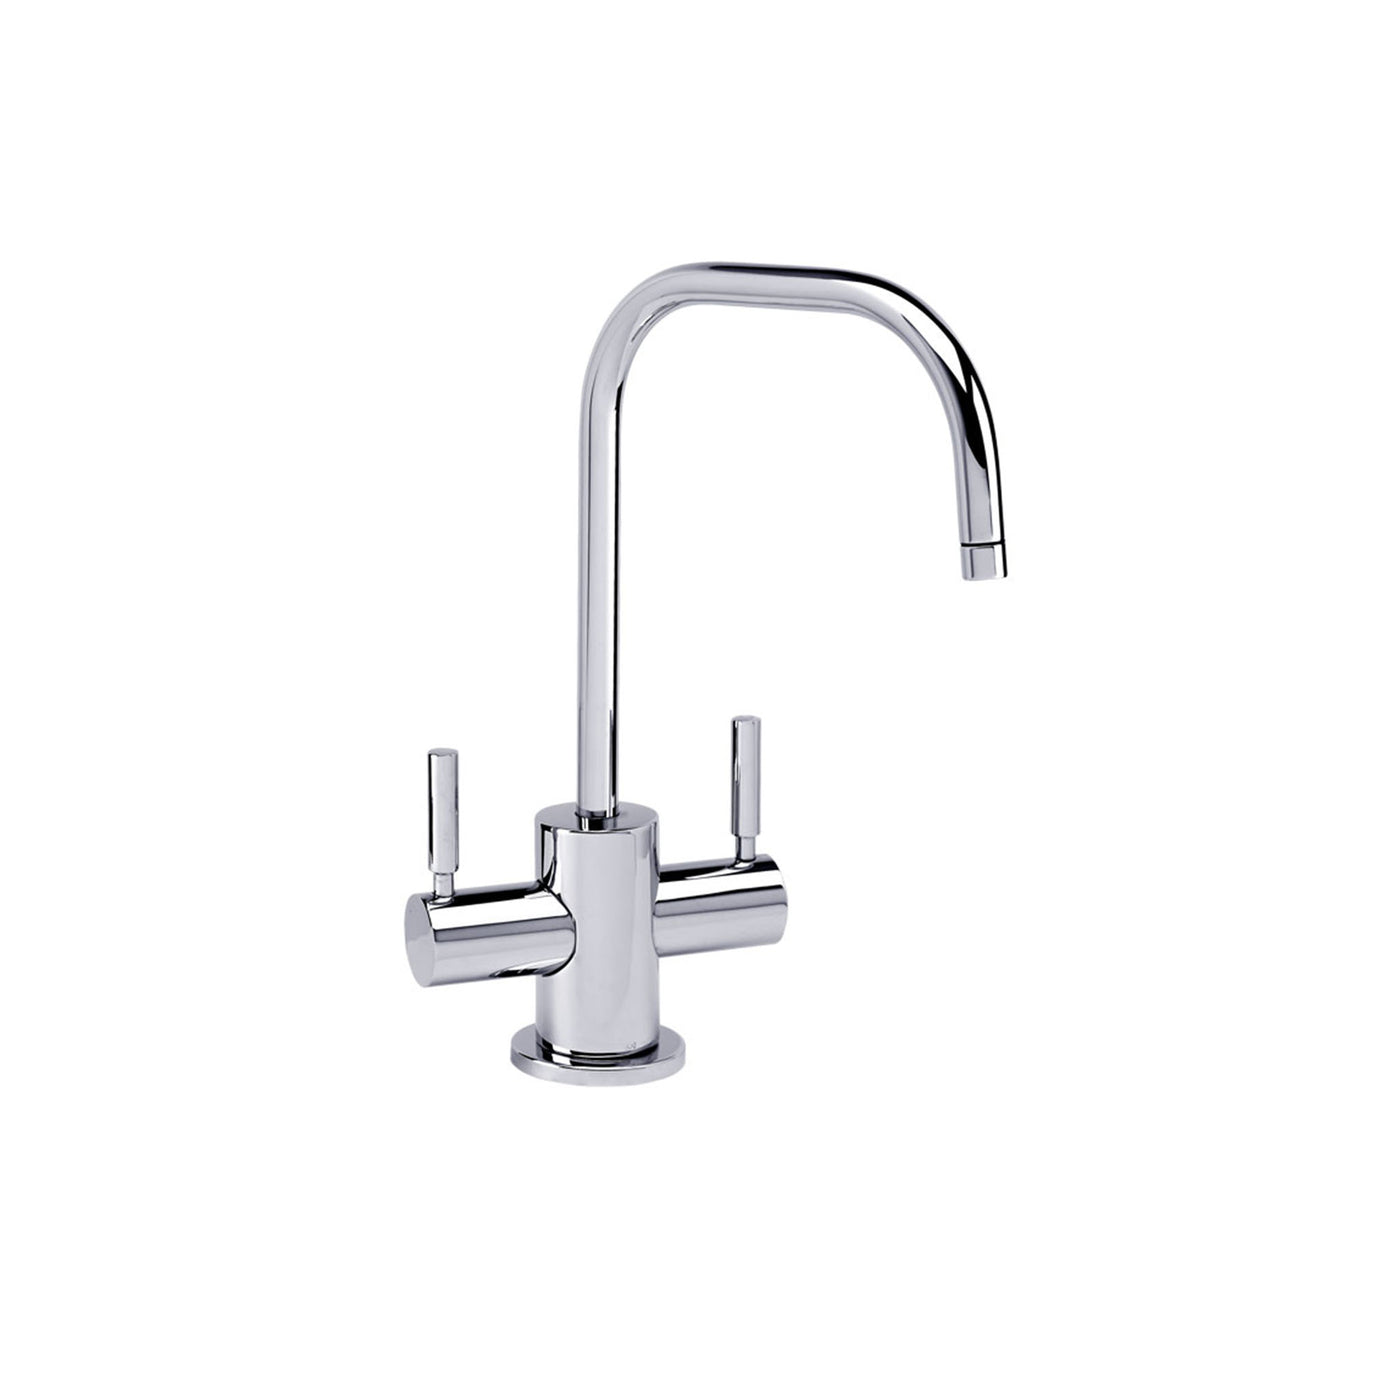 Fulton Hot and Cold Filtration Faucet